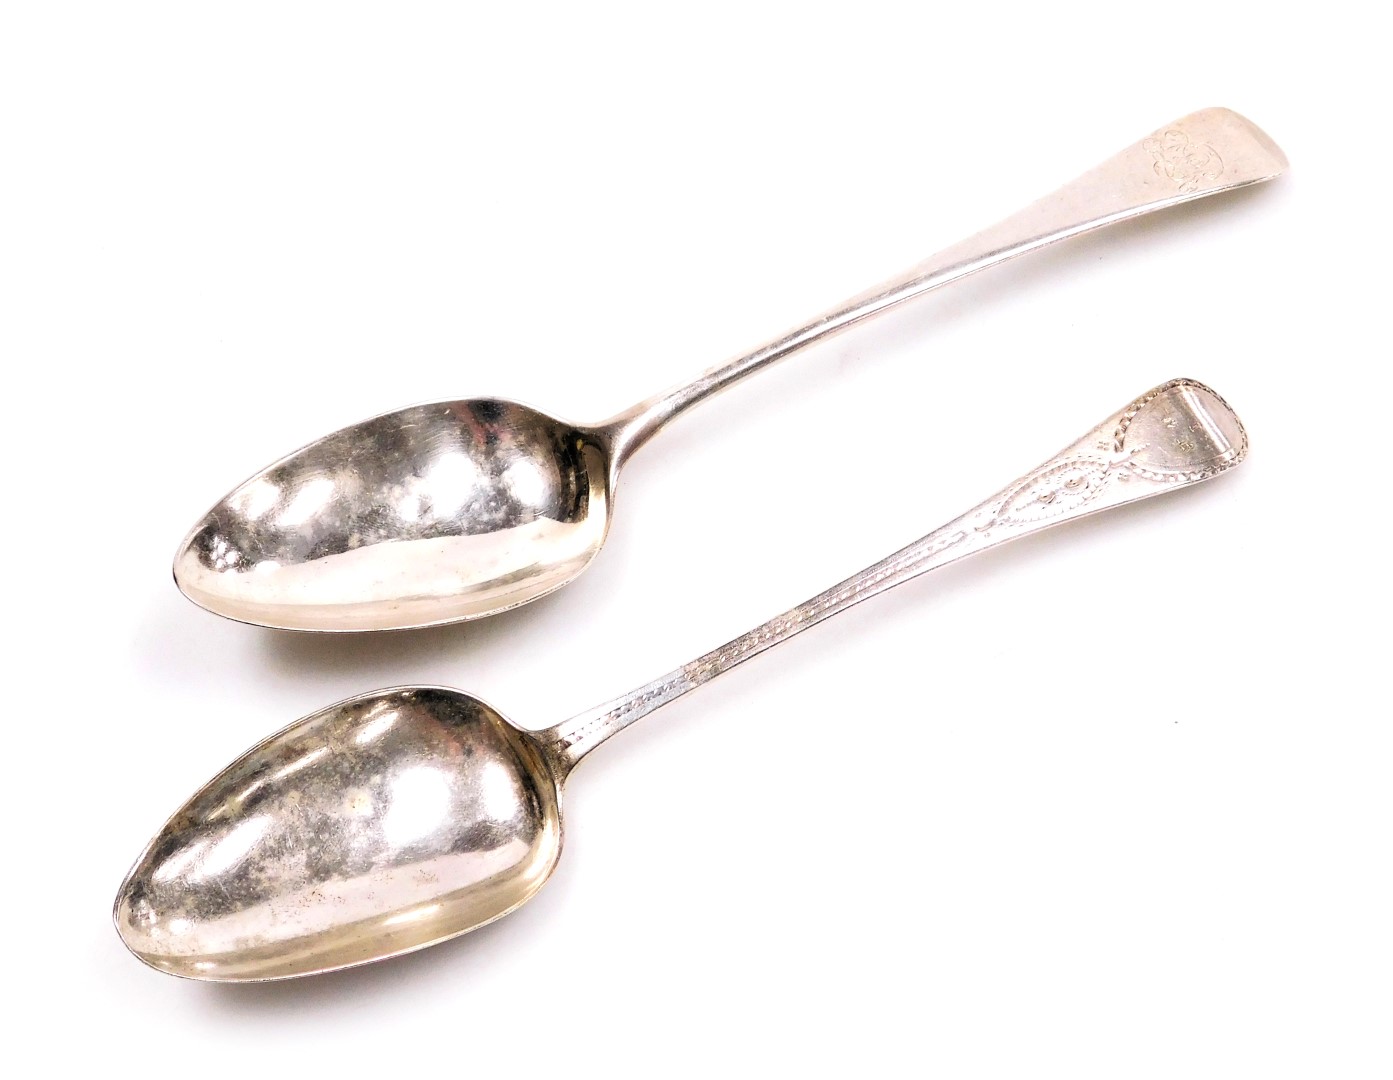 A George III Old English pattern tablespoon monogram engraved, London 1794, and a further tablespoon